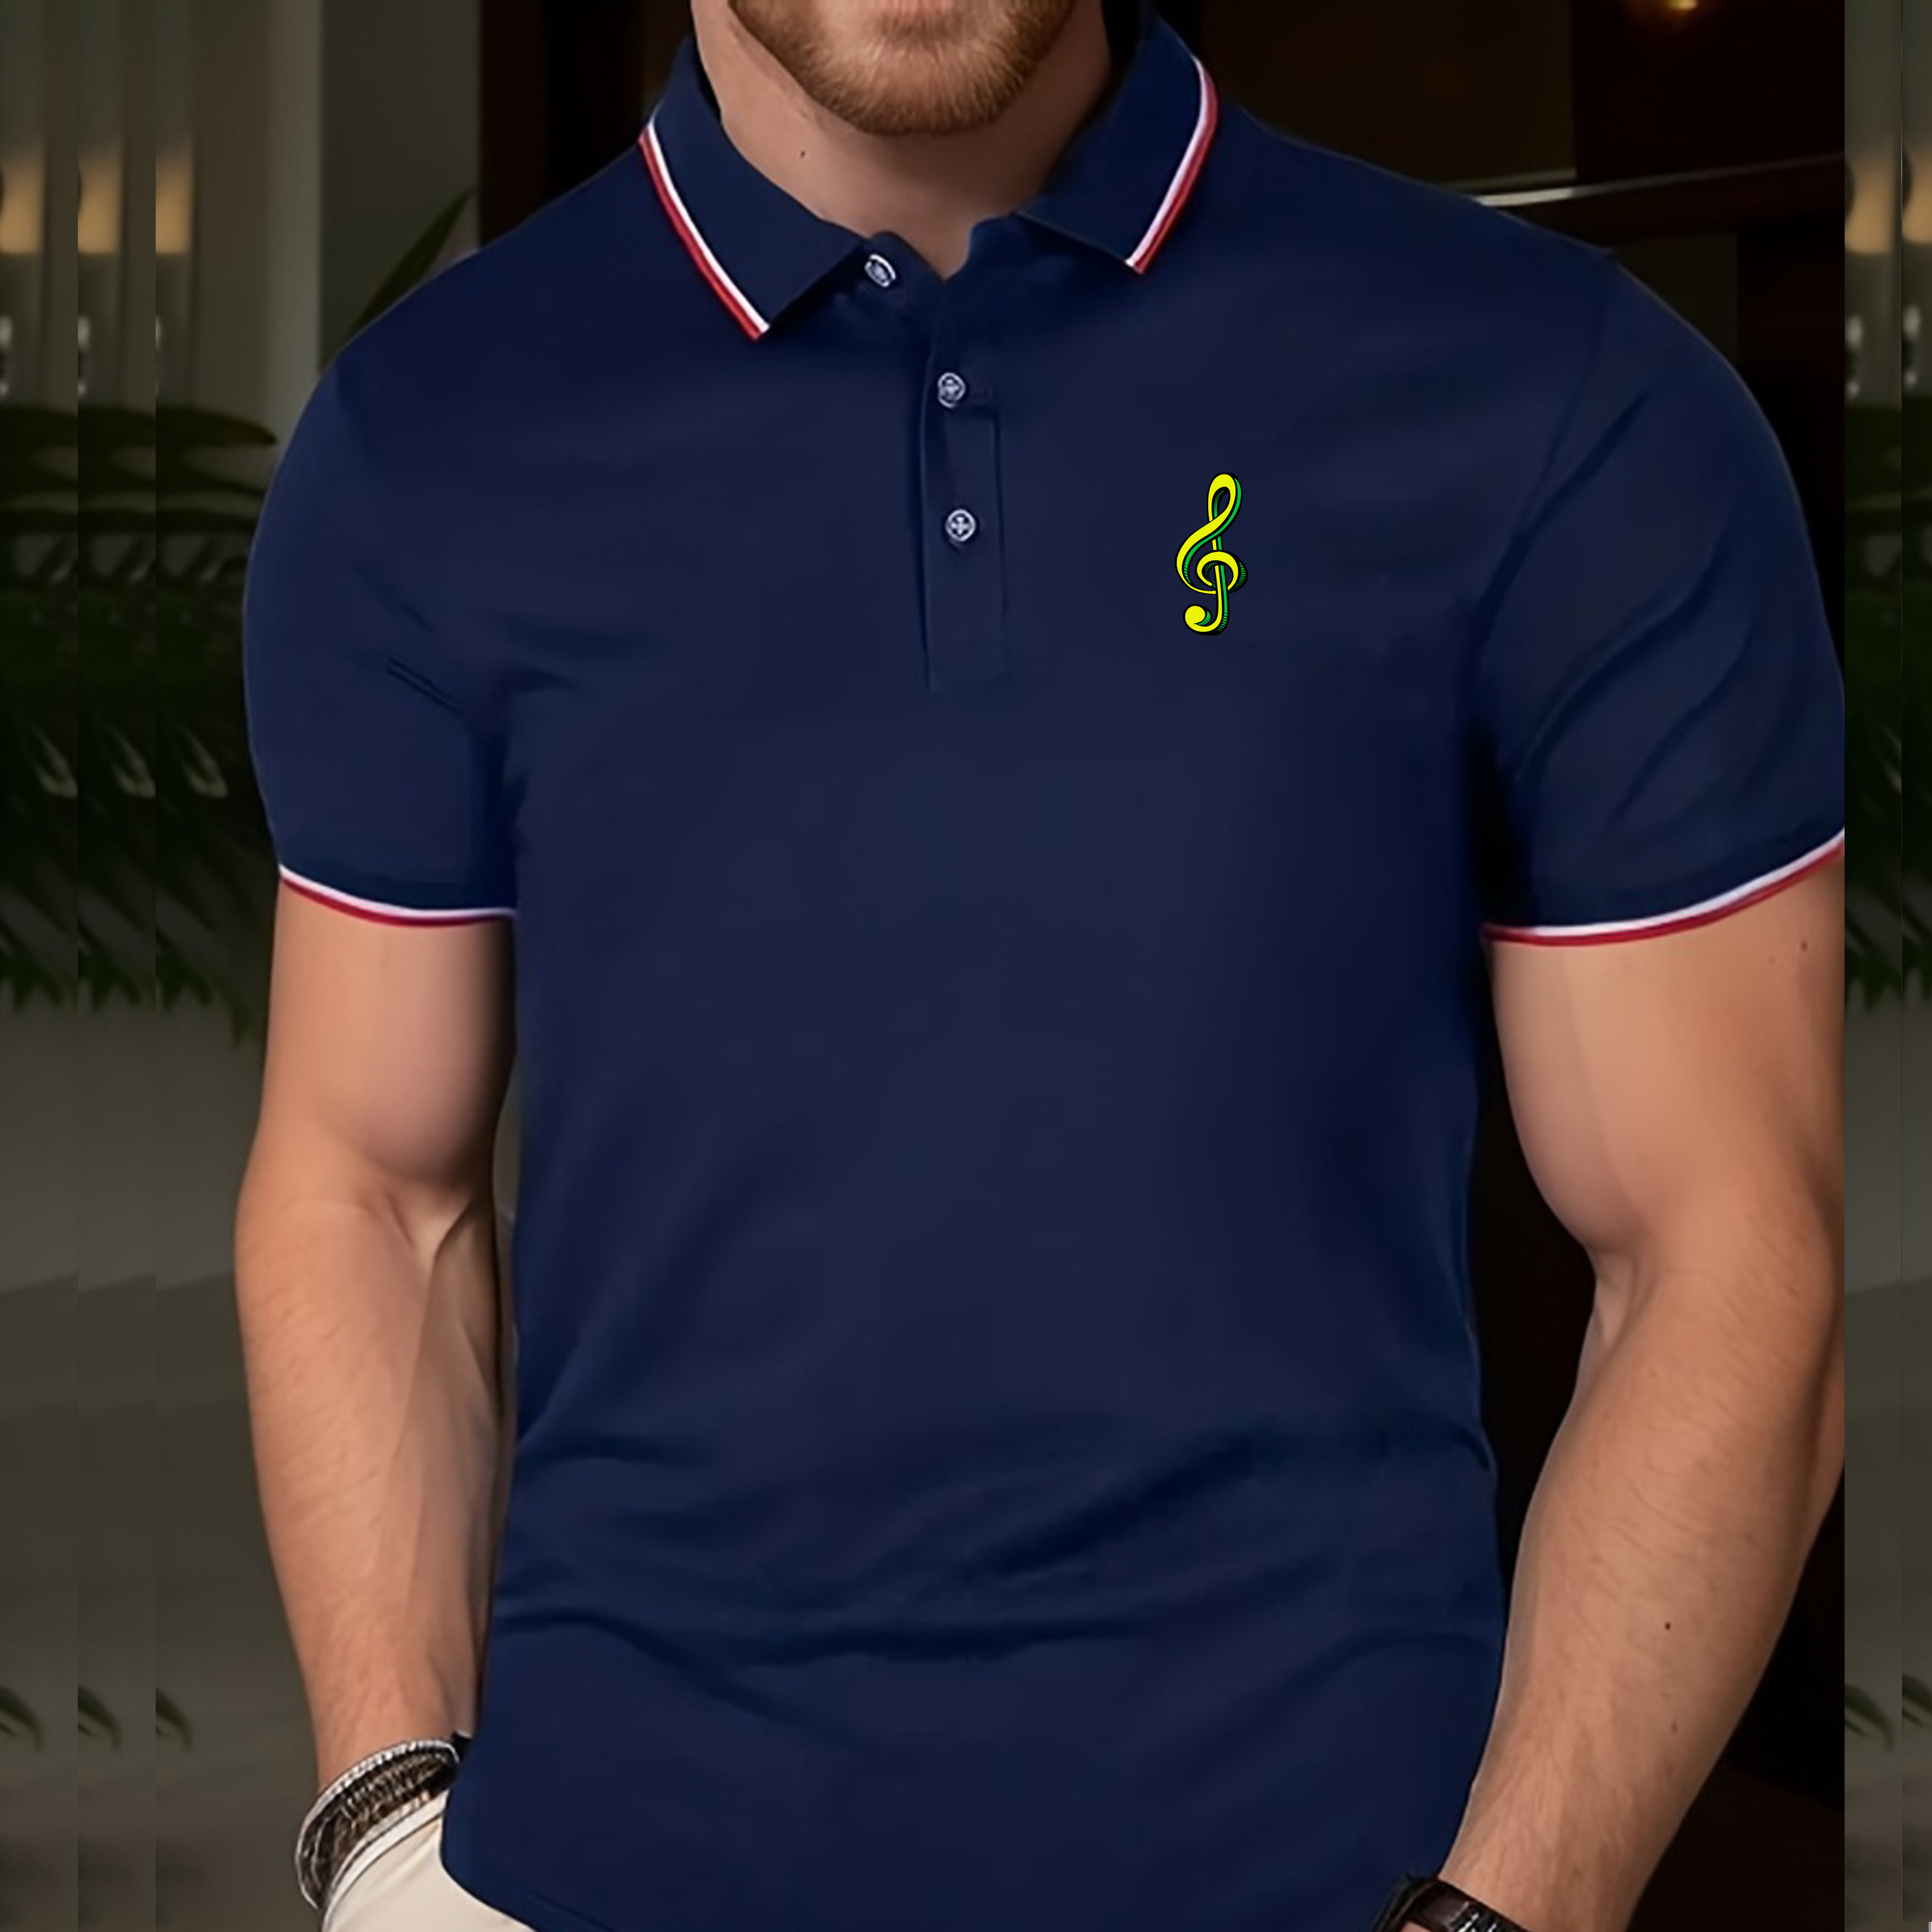 

Musical Note Print Men's Short Sleeve Button Up Golf Shirts, Casual Slightly Stretch Comfy Luxury Tops, Men's Clothing